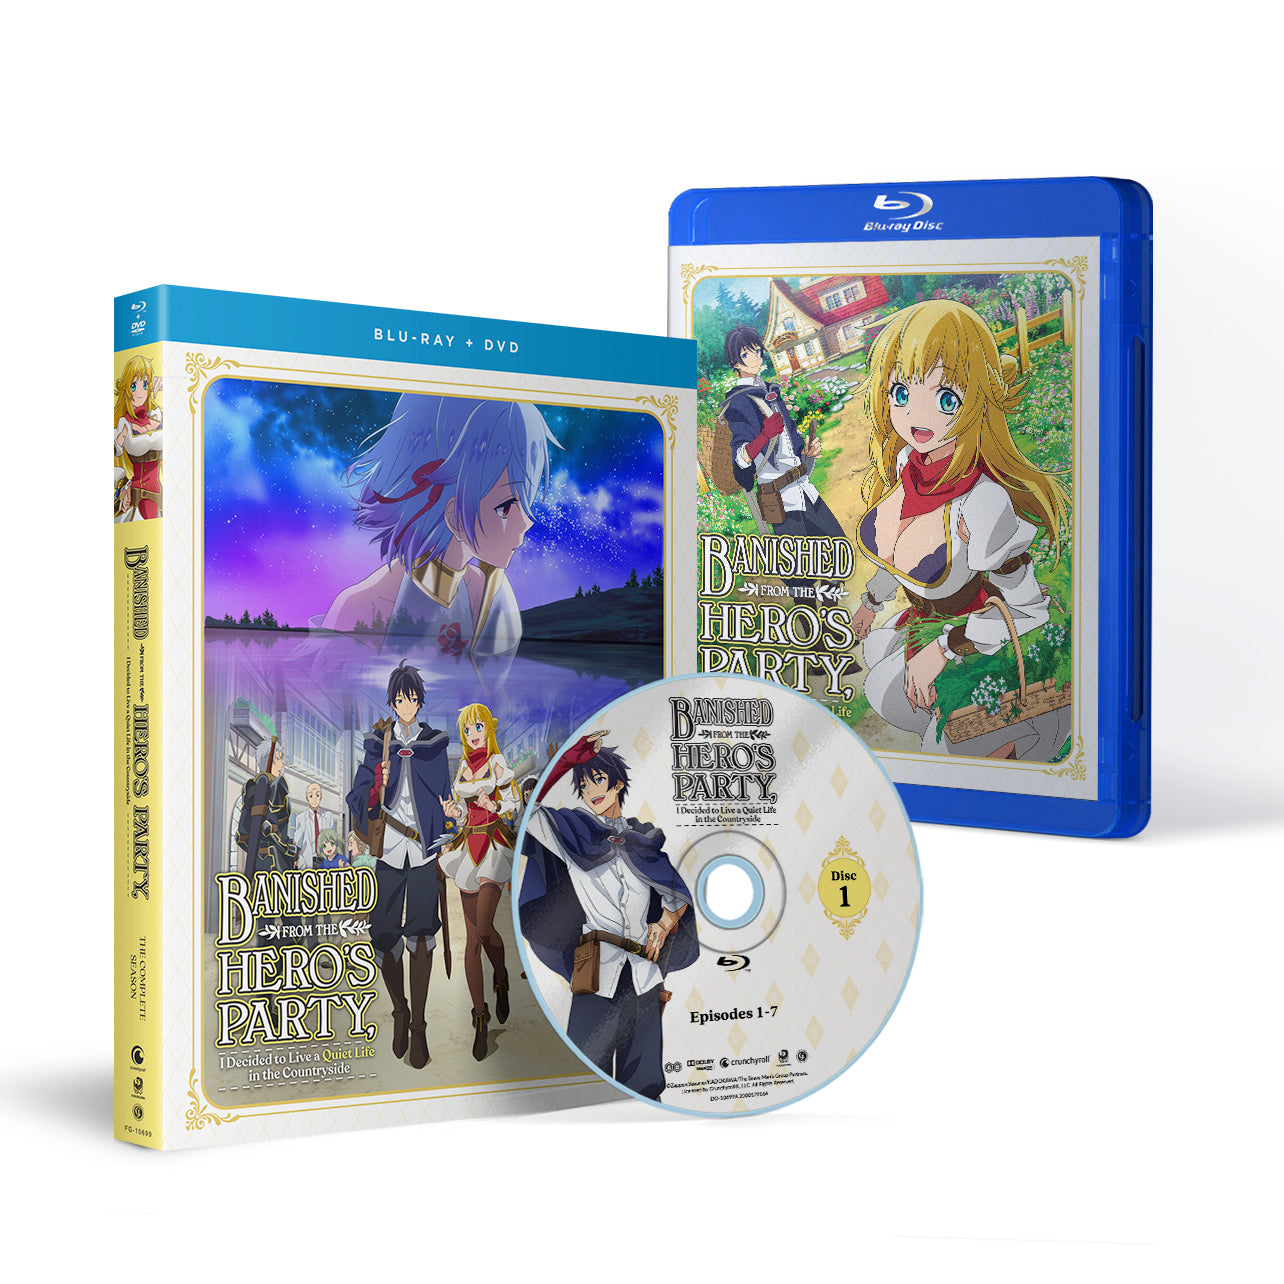 Banished from the Hero's Party I Decided to Live a Quiet Life in the Countryside - The Complete Season - Blu-ray + DVD image count 0